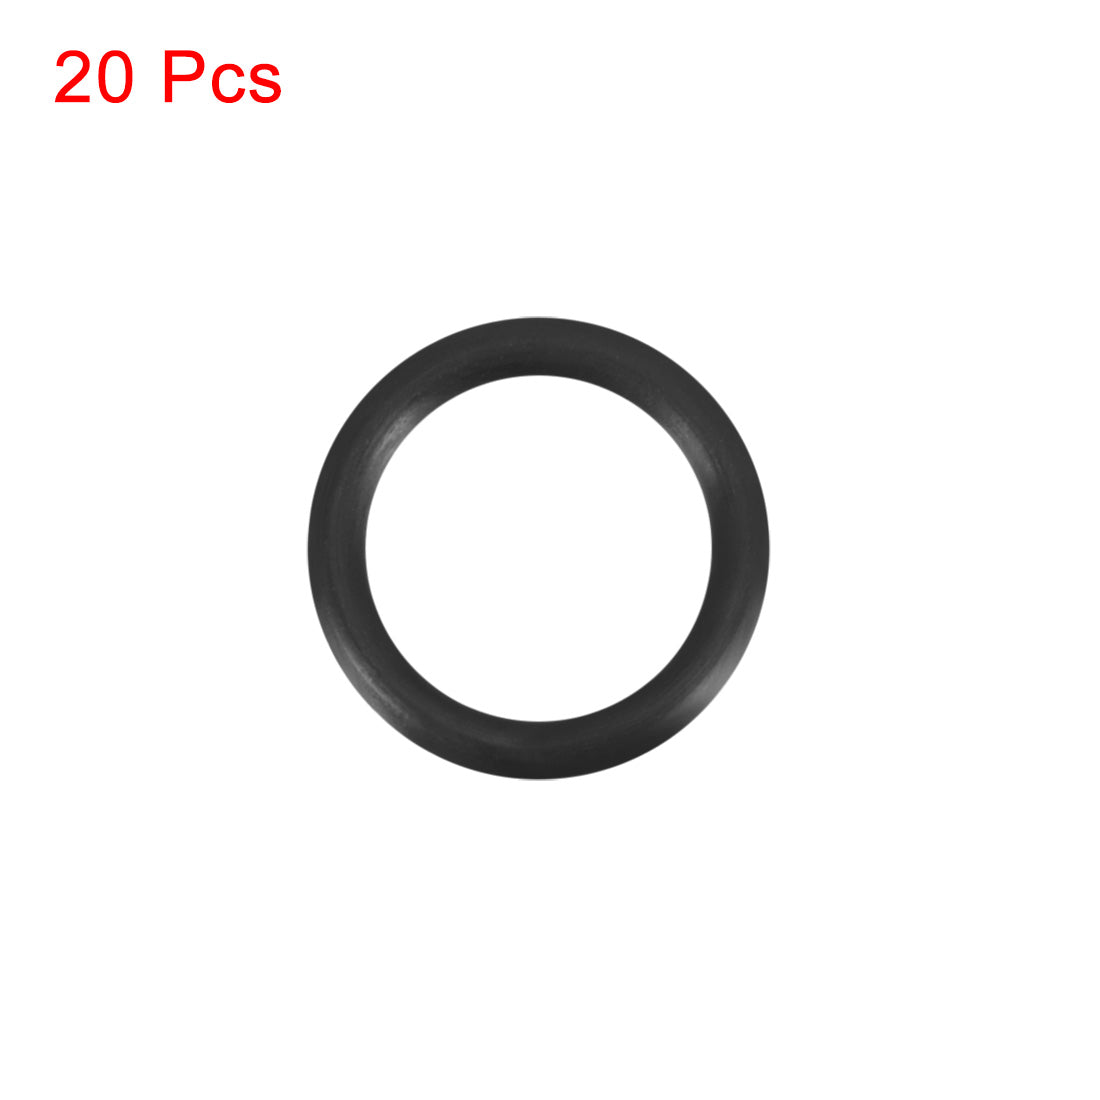 uxcell Uxcell O-Rings Nitrile Rubber 10mm x 14mm x 2mm Seal Rings Sealing Gasket 20pcs